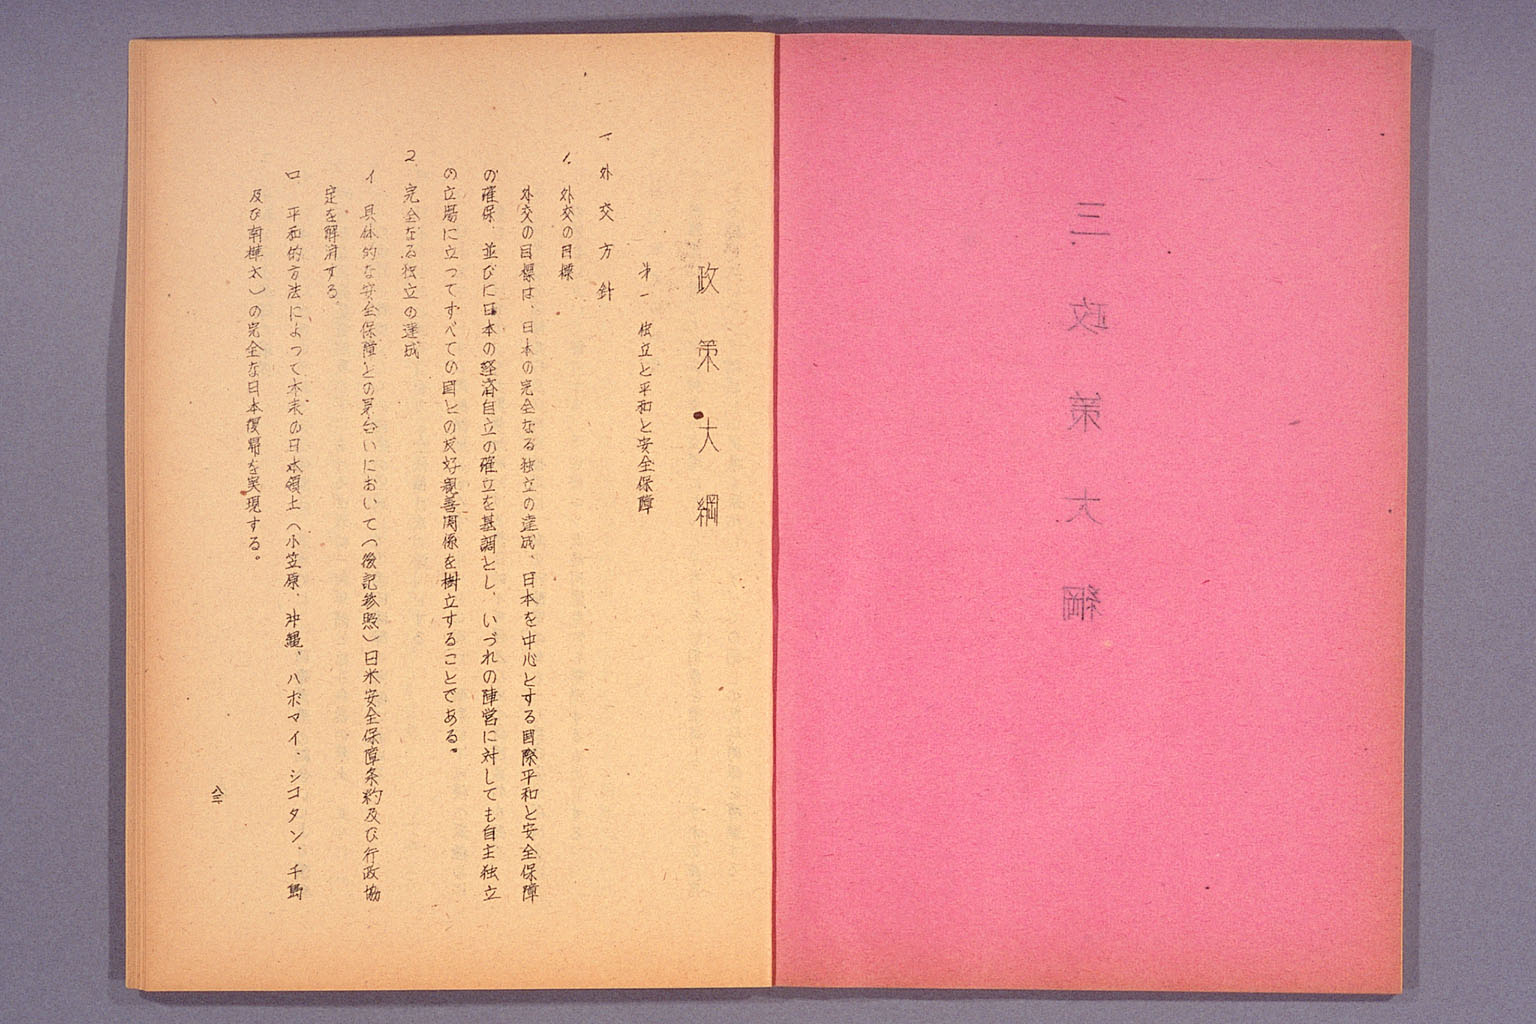 Party platform of Japan Socialist Party, party policies, and party guideline (larger)